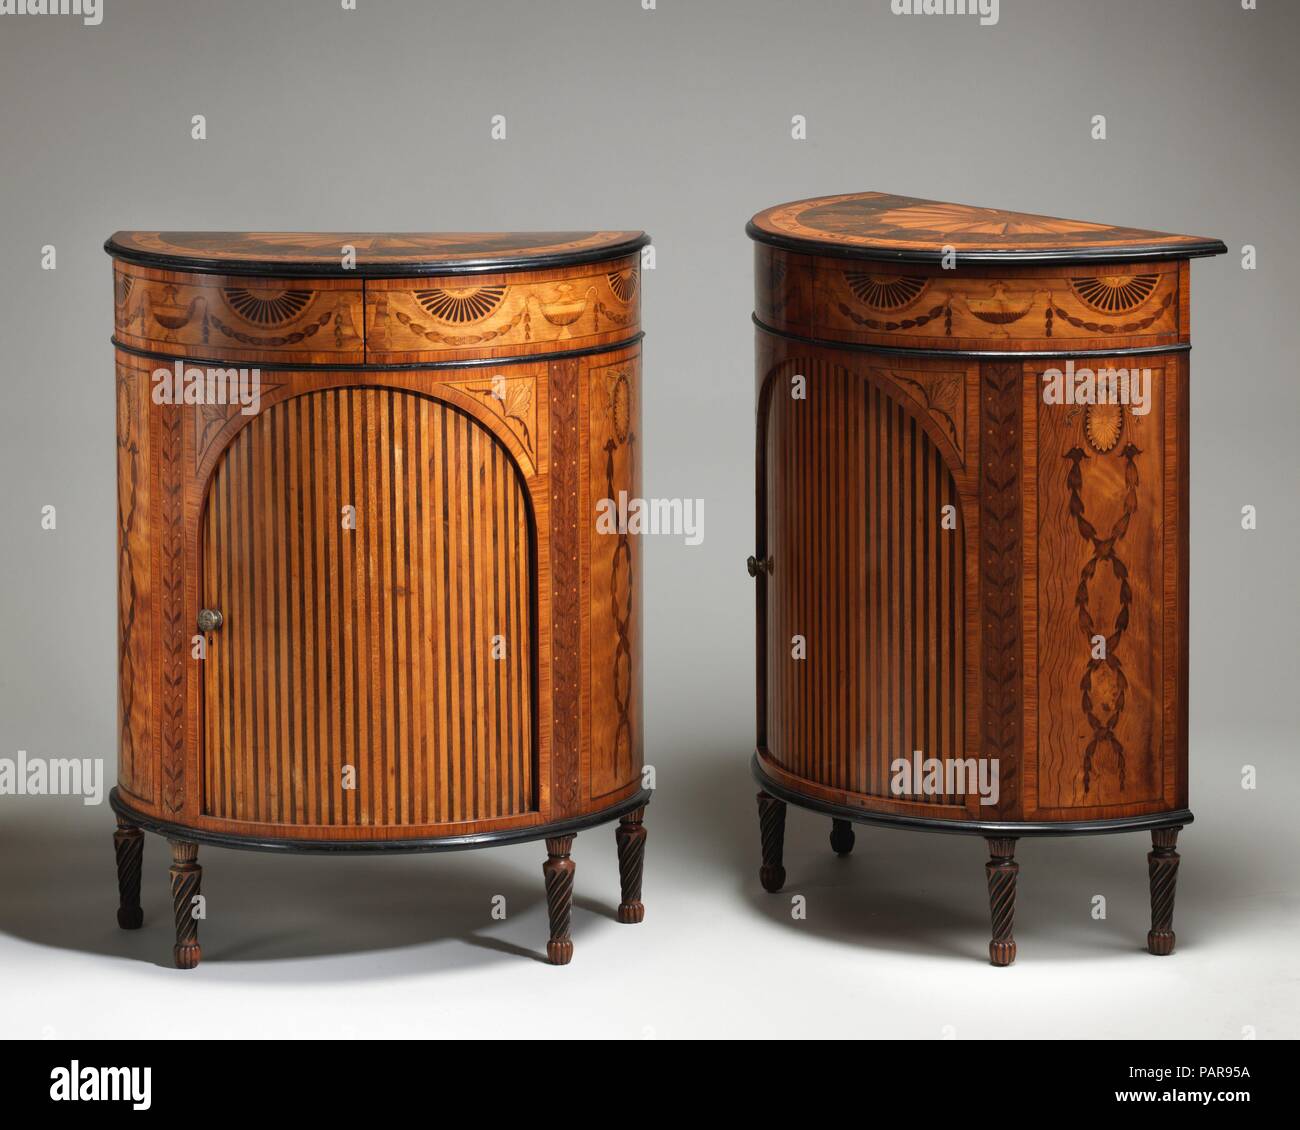 Pair Of Demi Lune Cabinets Culture British Dimensions Overall